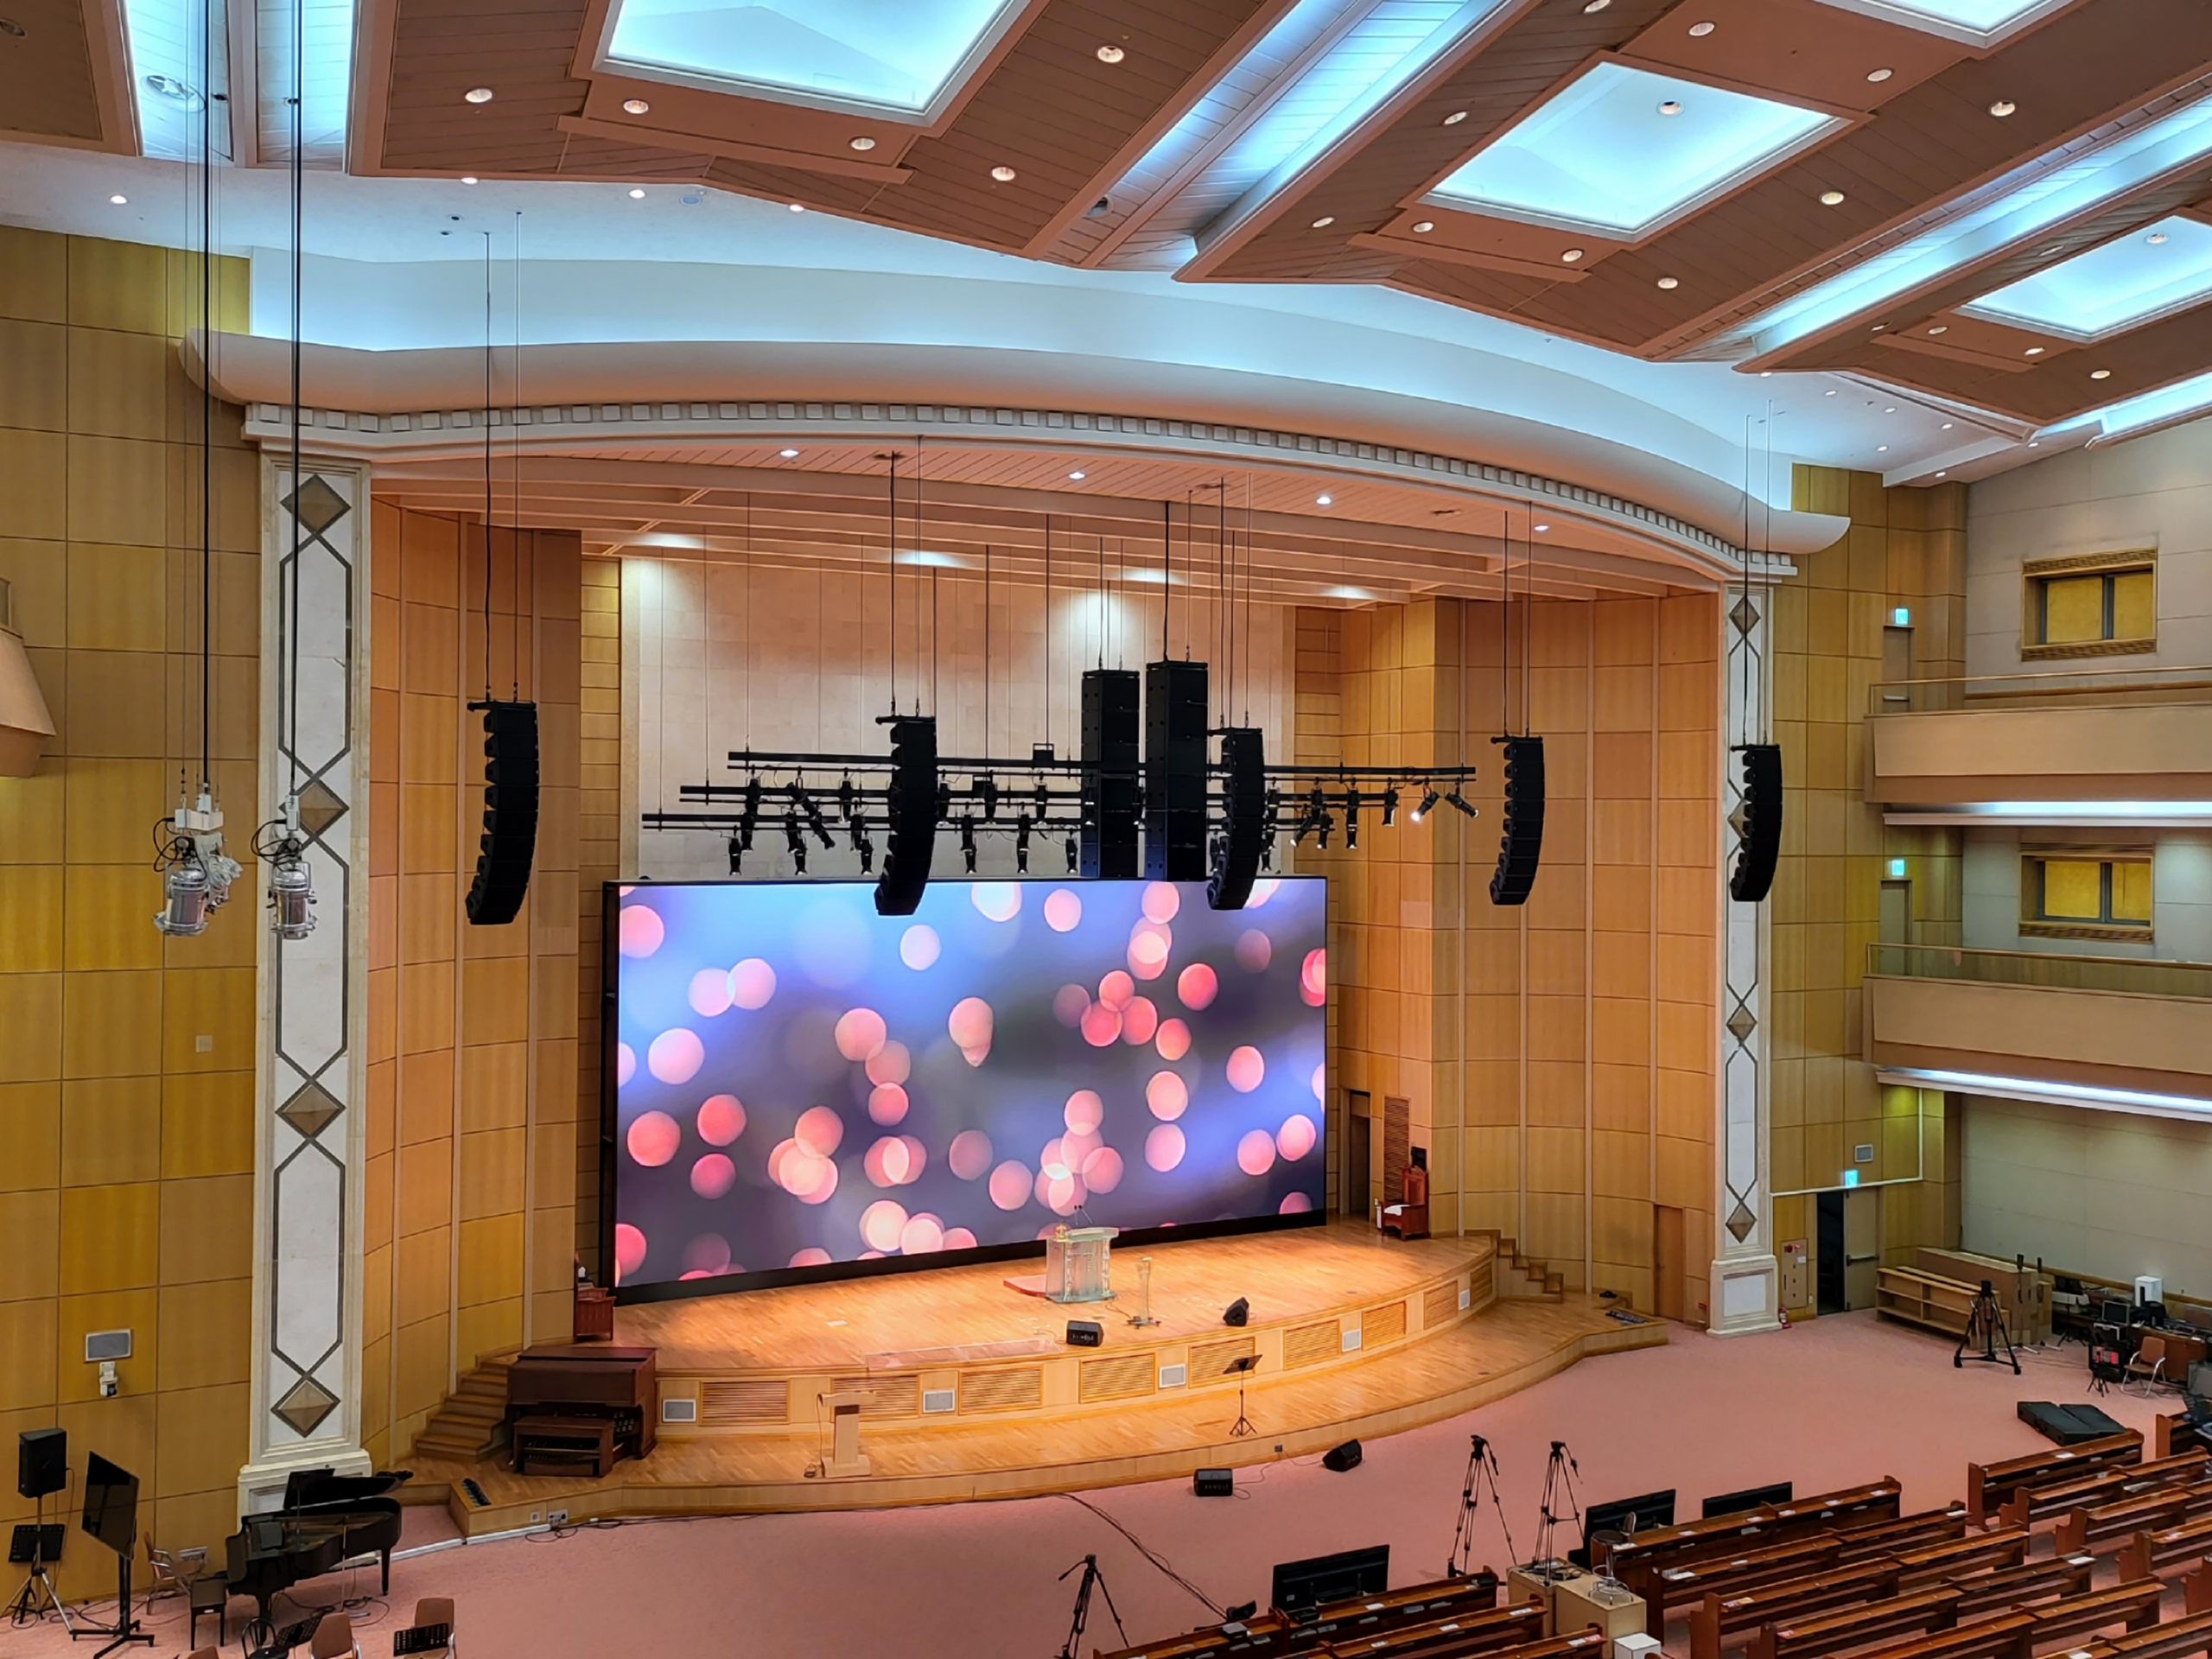 NEXO immersive sound system is first in a South Korean church